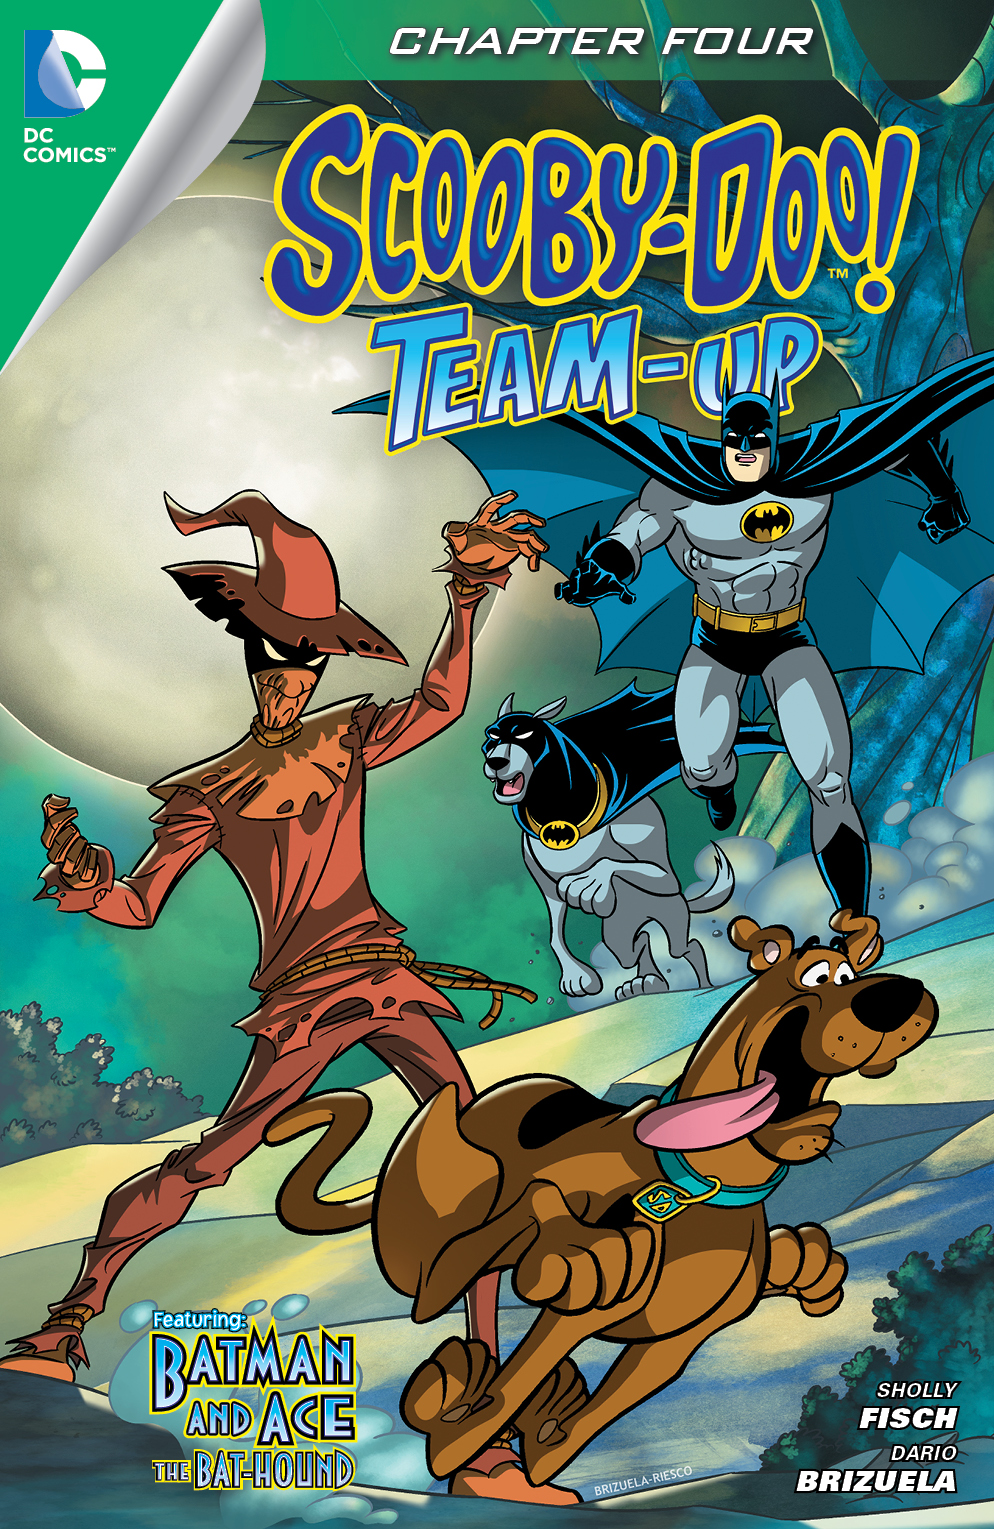 Scooby-Doo Team-Up #4 preview images